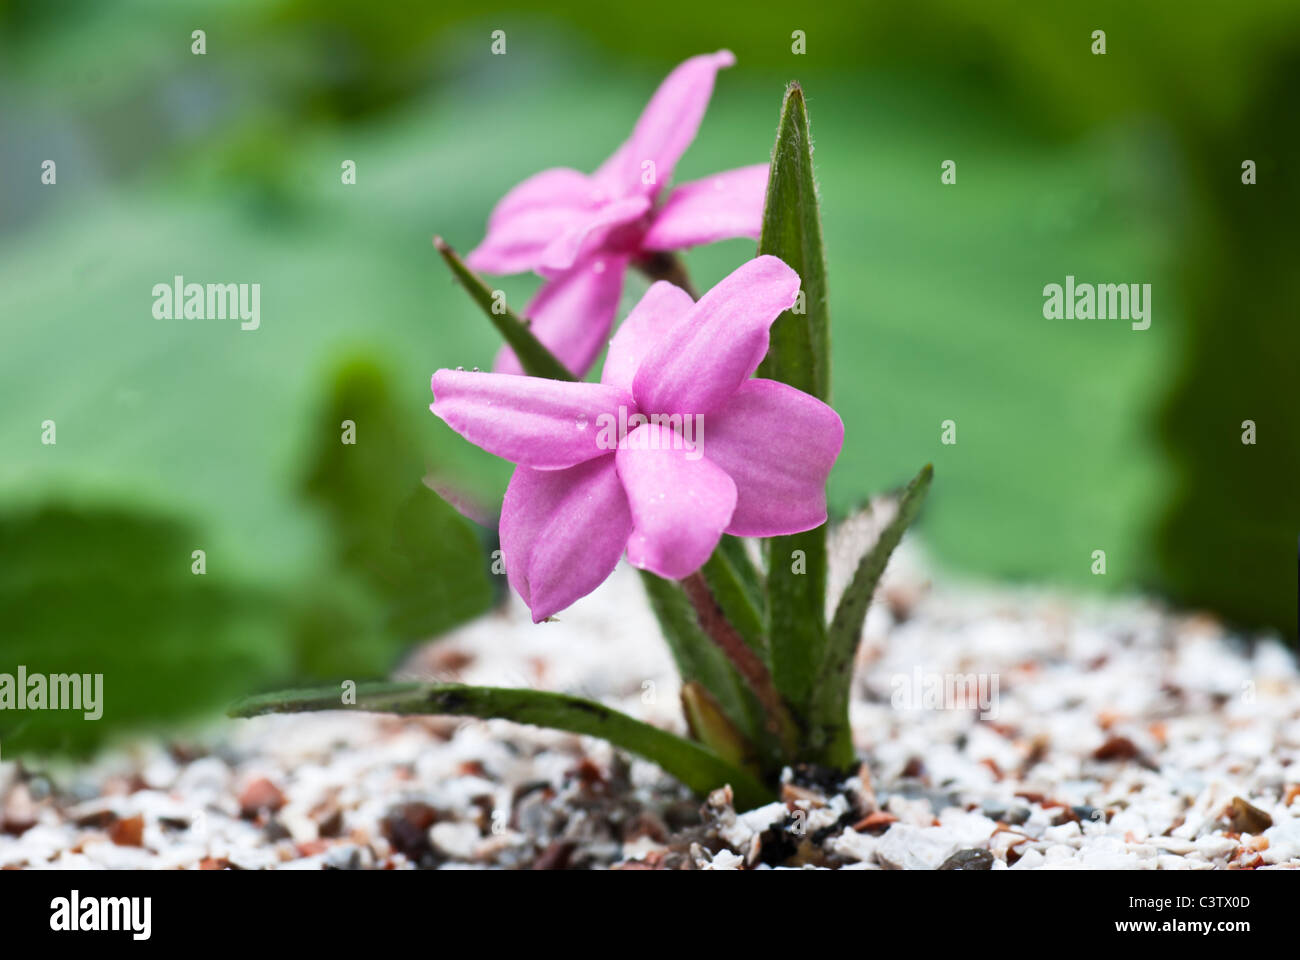 Rhodohypoxis baurii Stella growing in a container Stock Photo